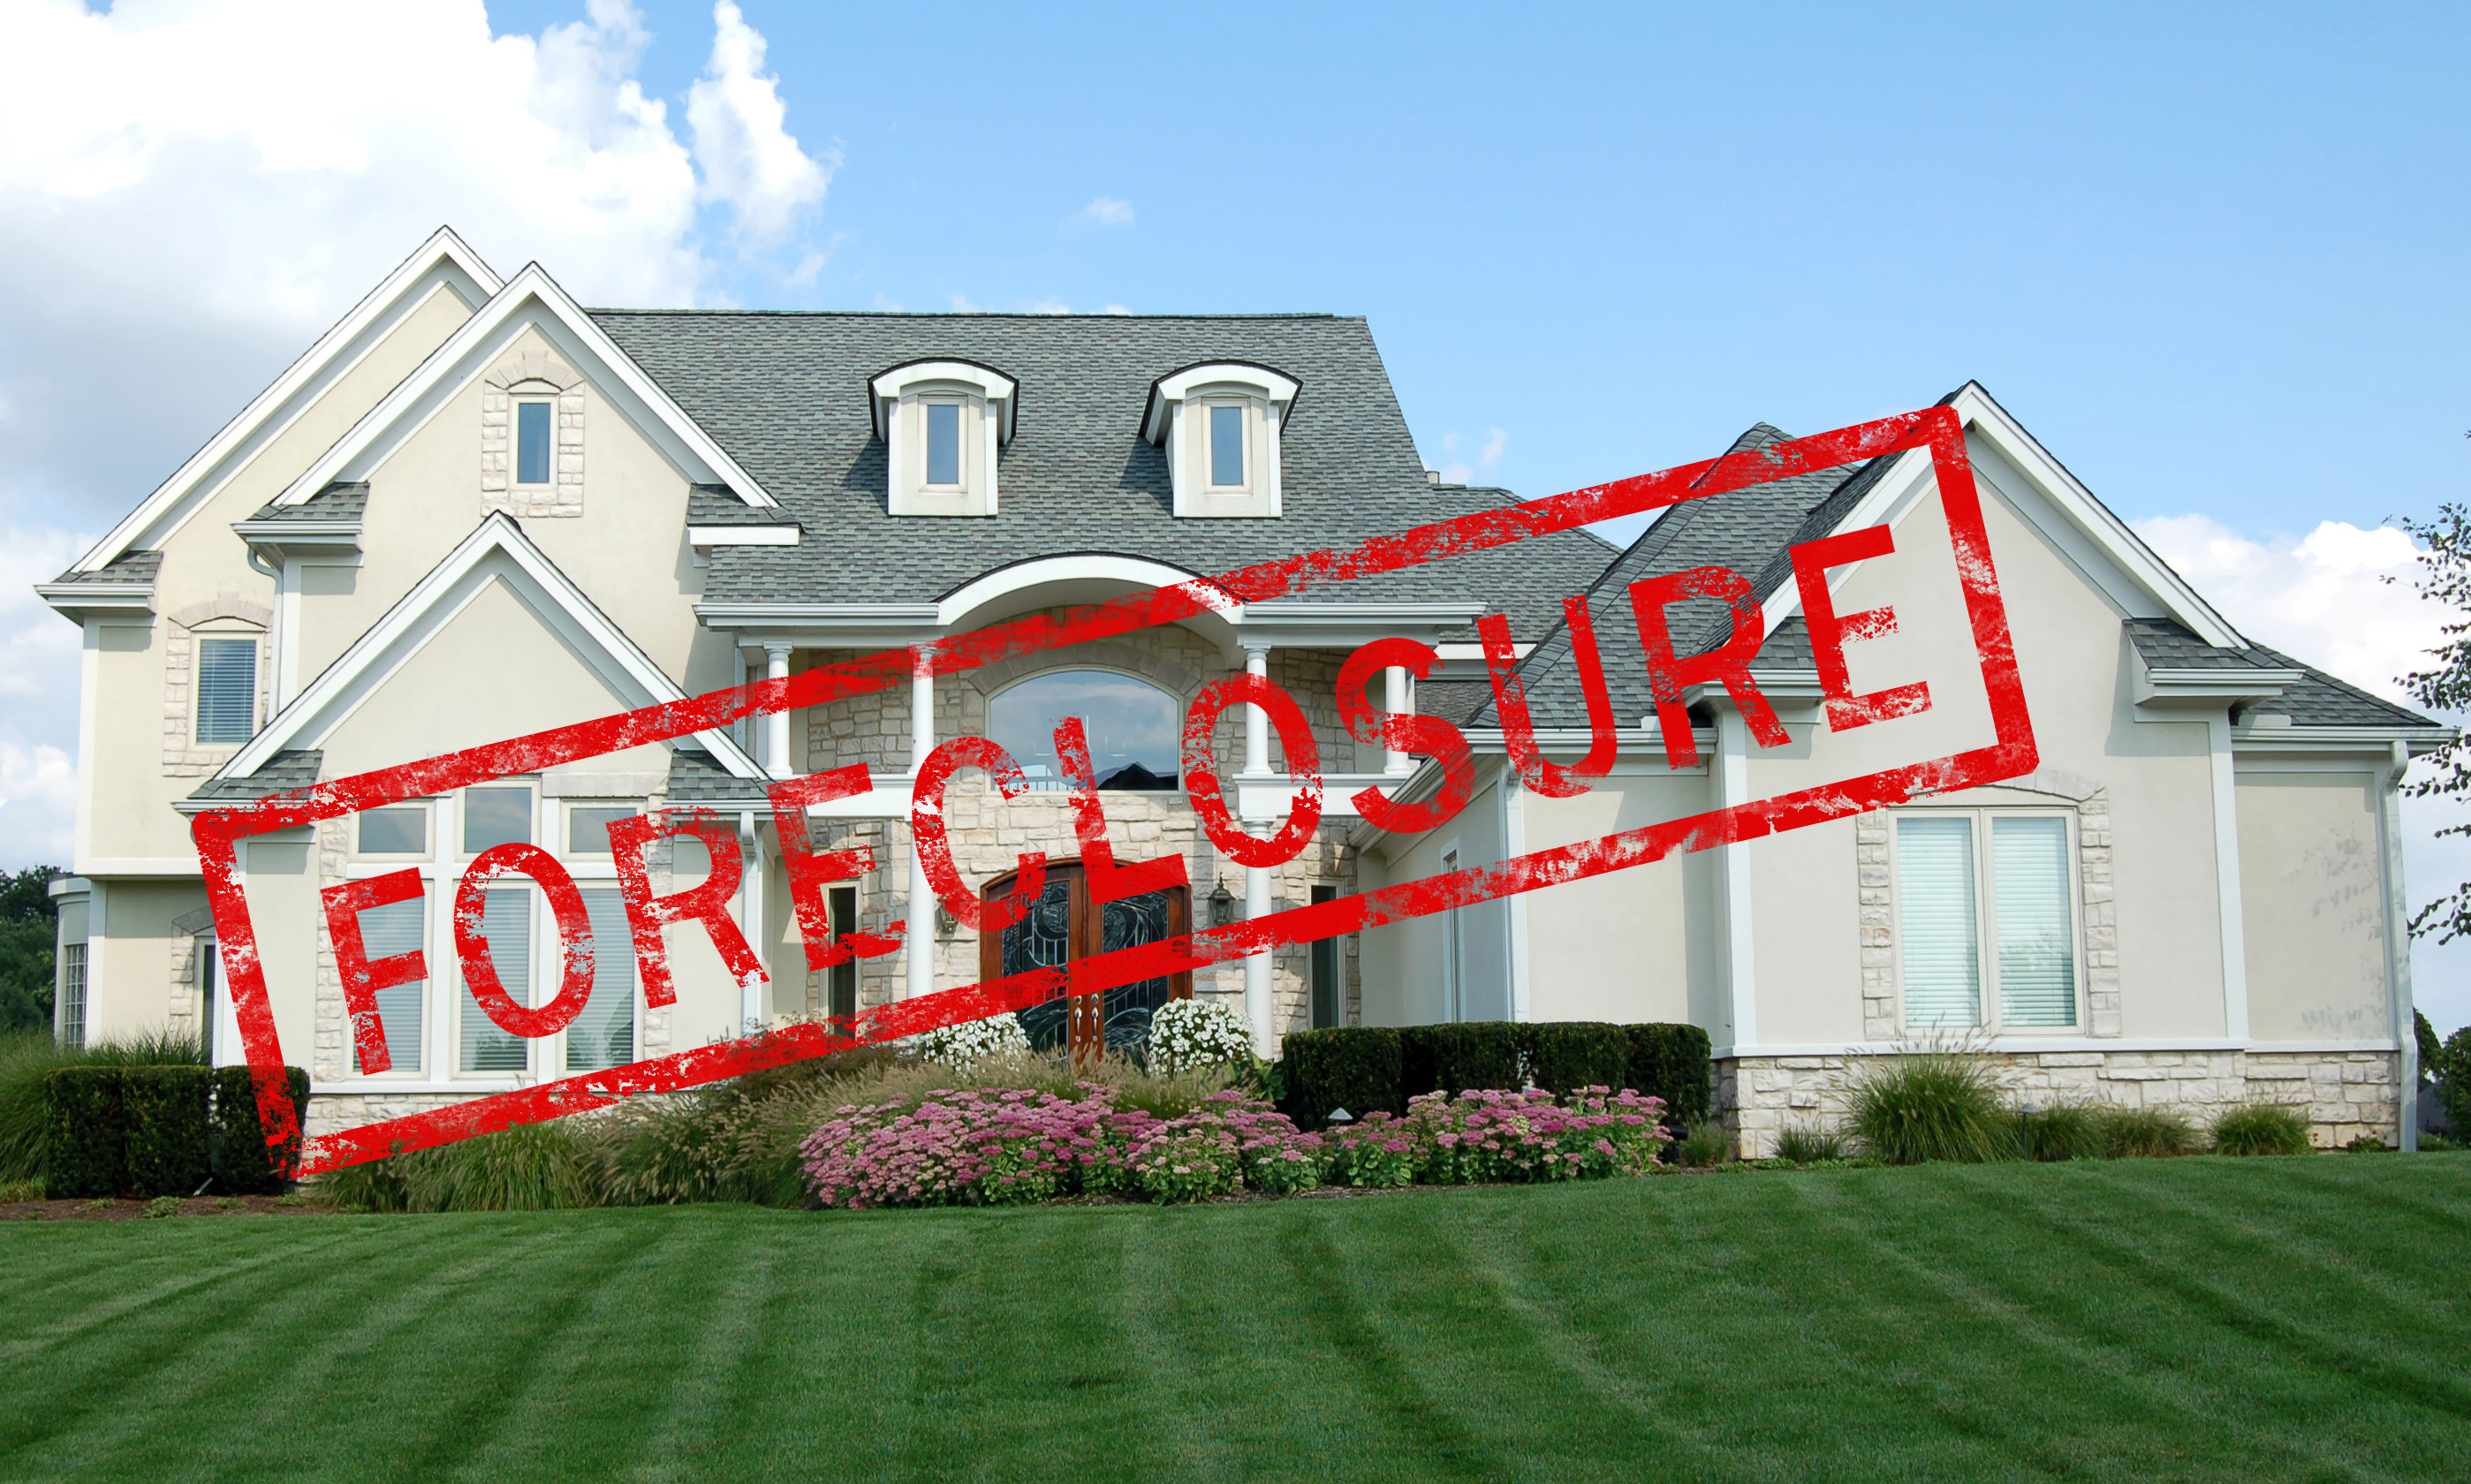 Call DRA Appraisals, Inc when you need appraisals of Wake foreclosures